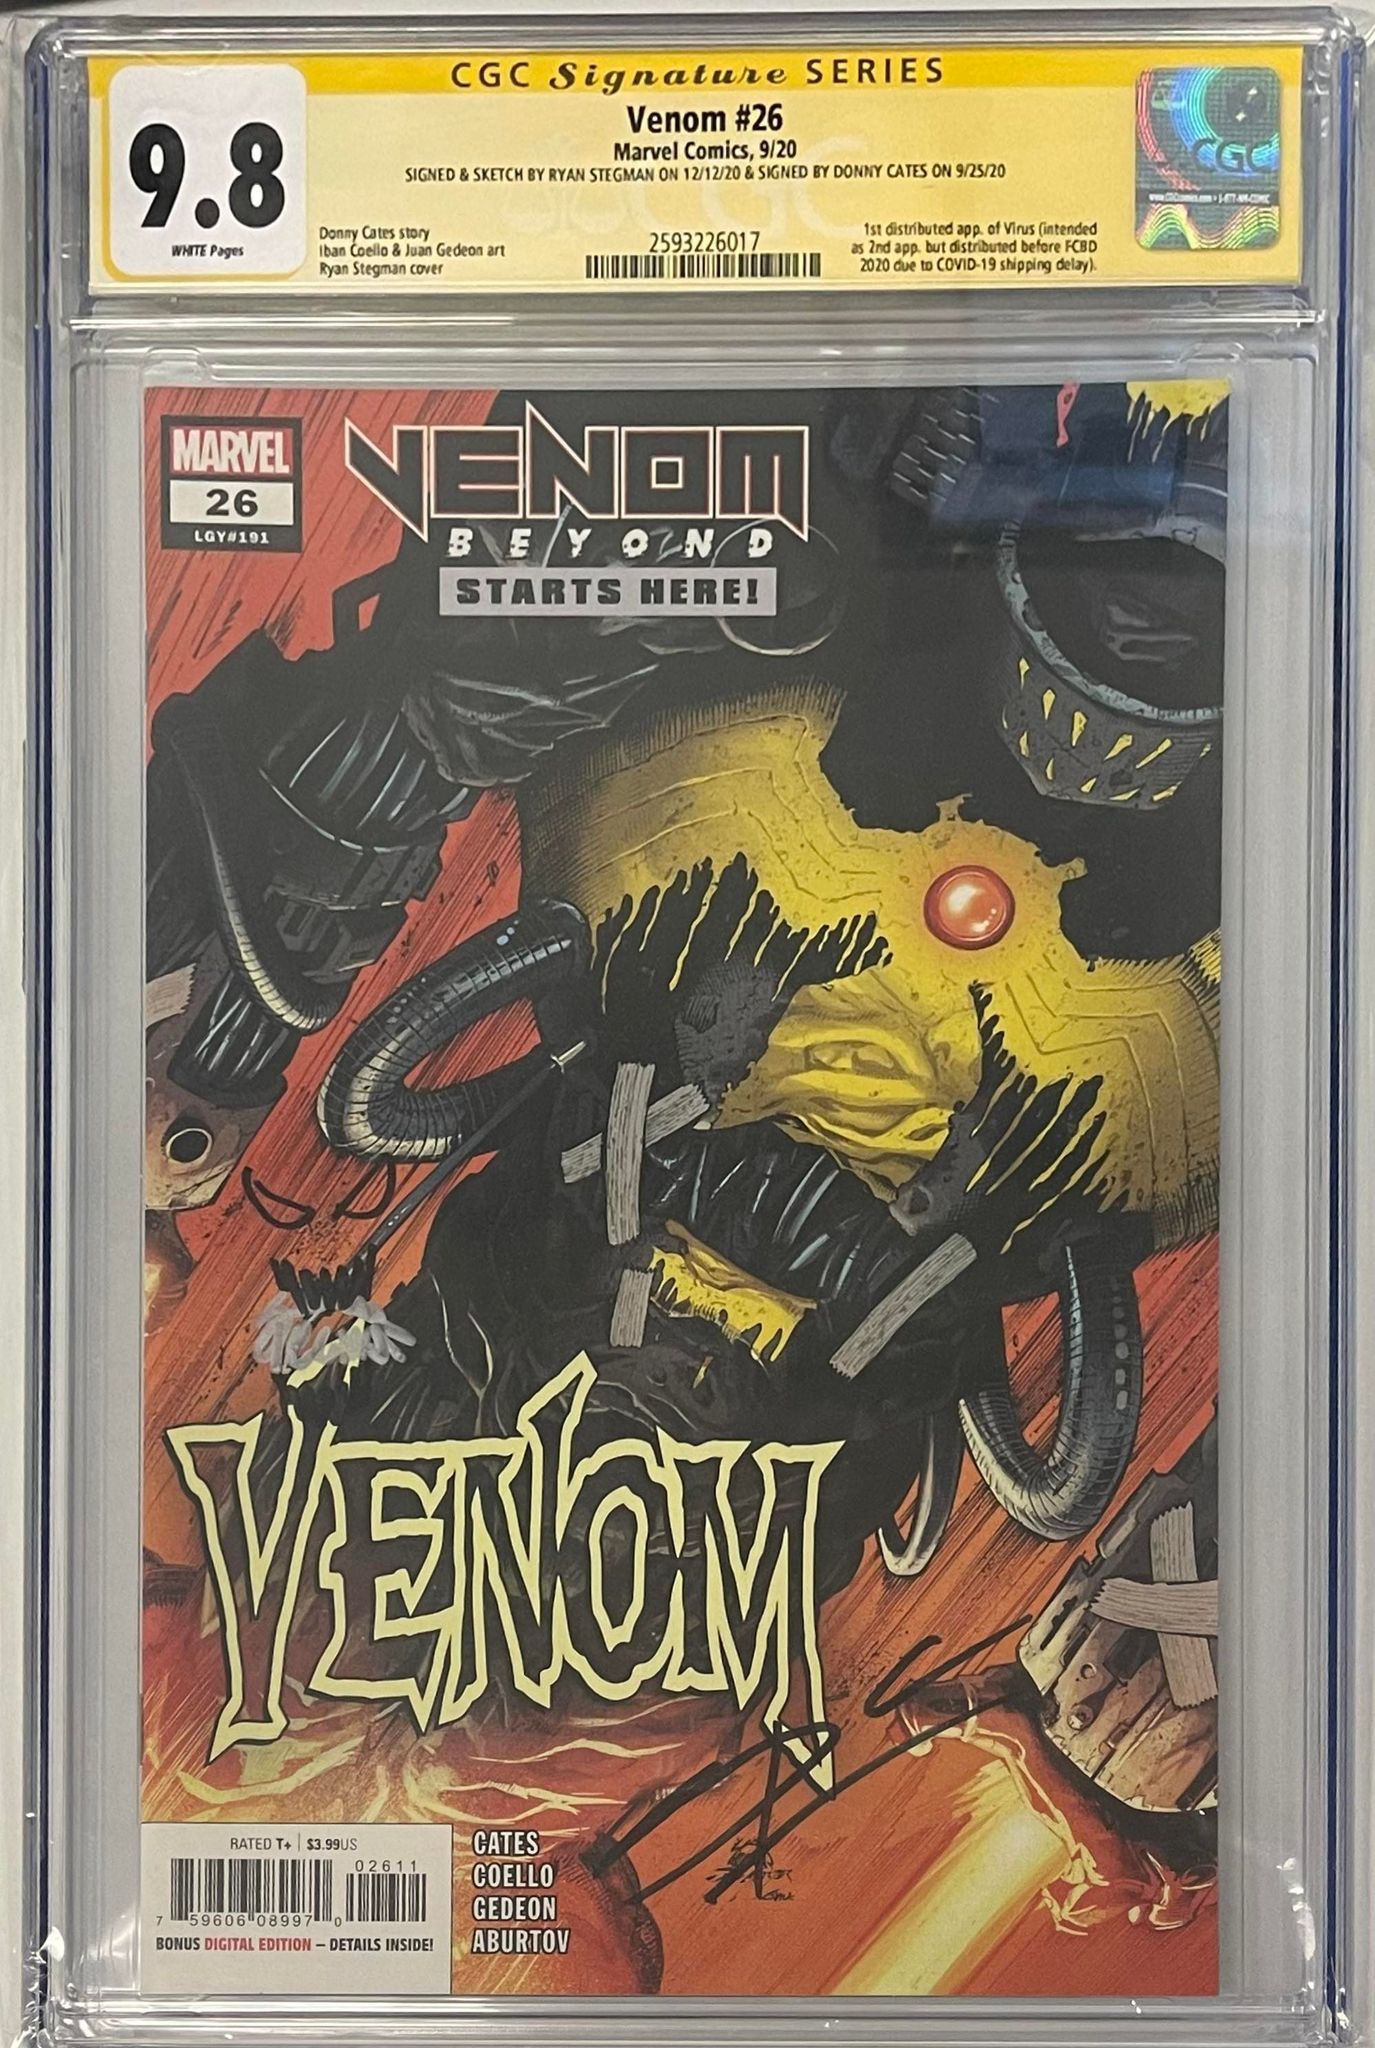 VENOM #26 SIGNED BY DONNY CATES SIGNED & REMARKED BY RYAN STEGMAN CGC 9.8